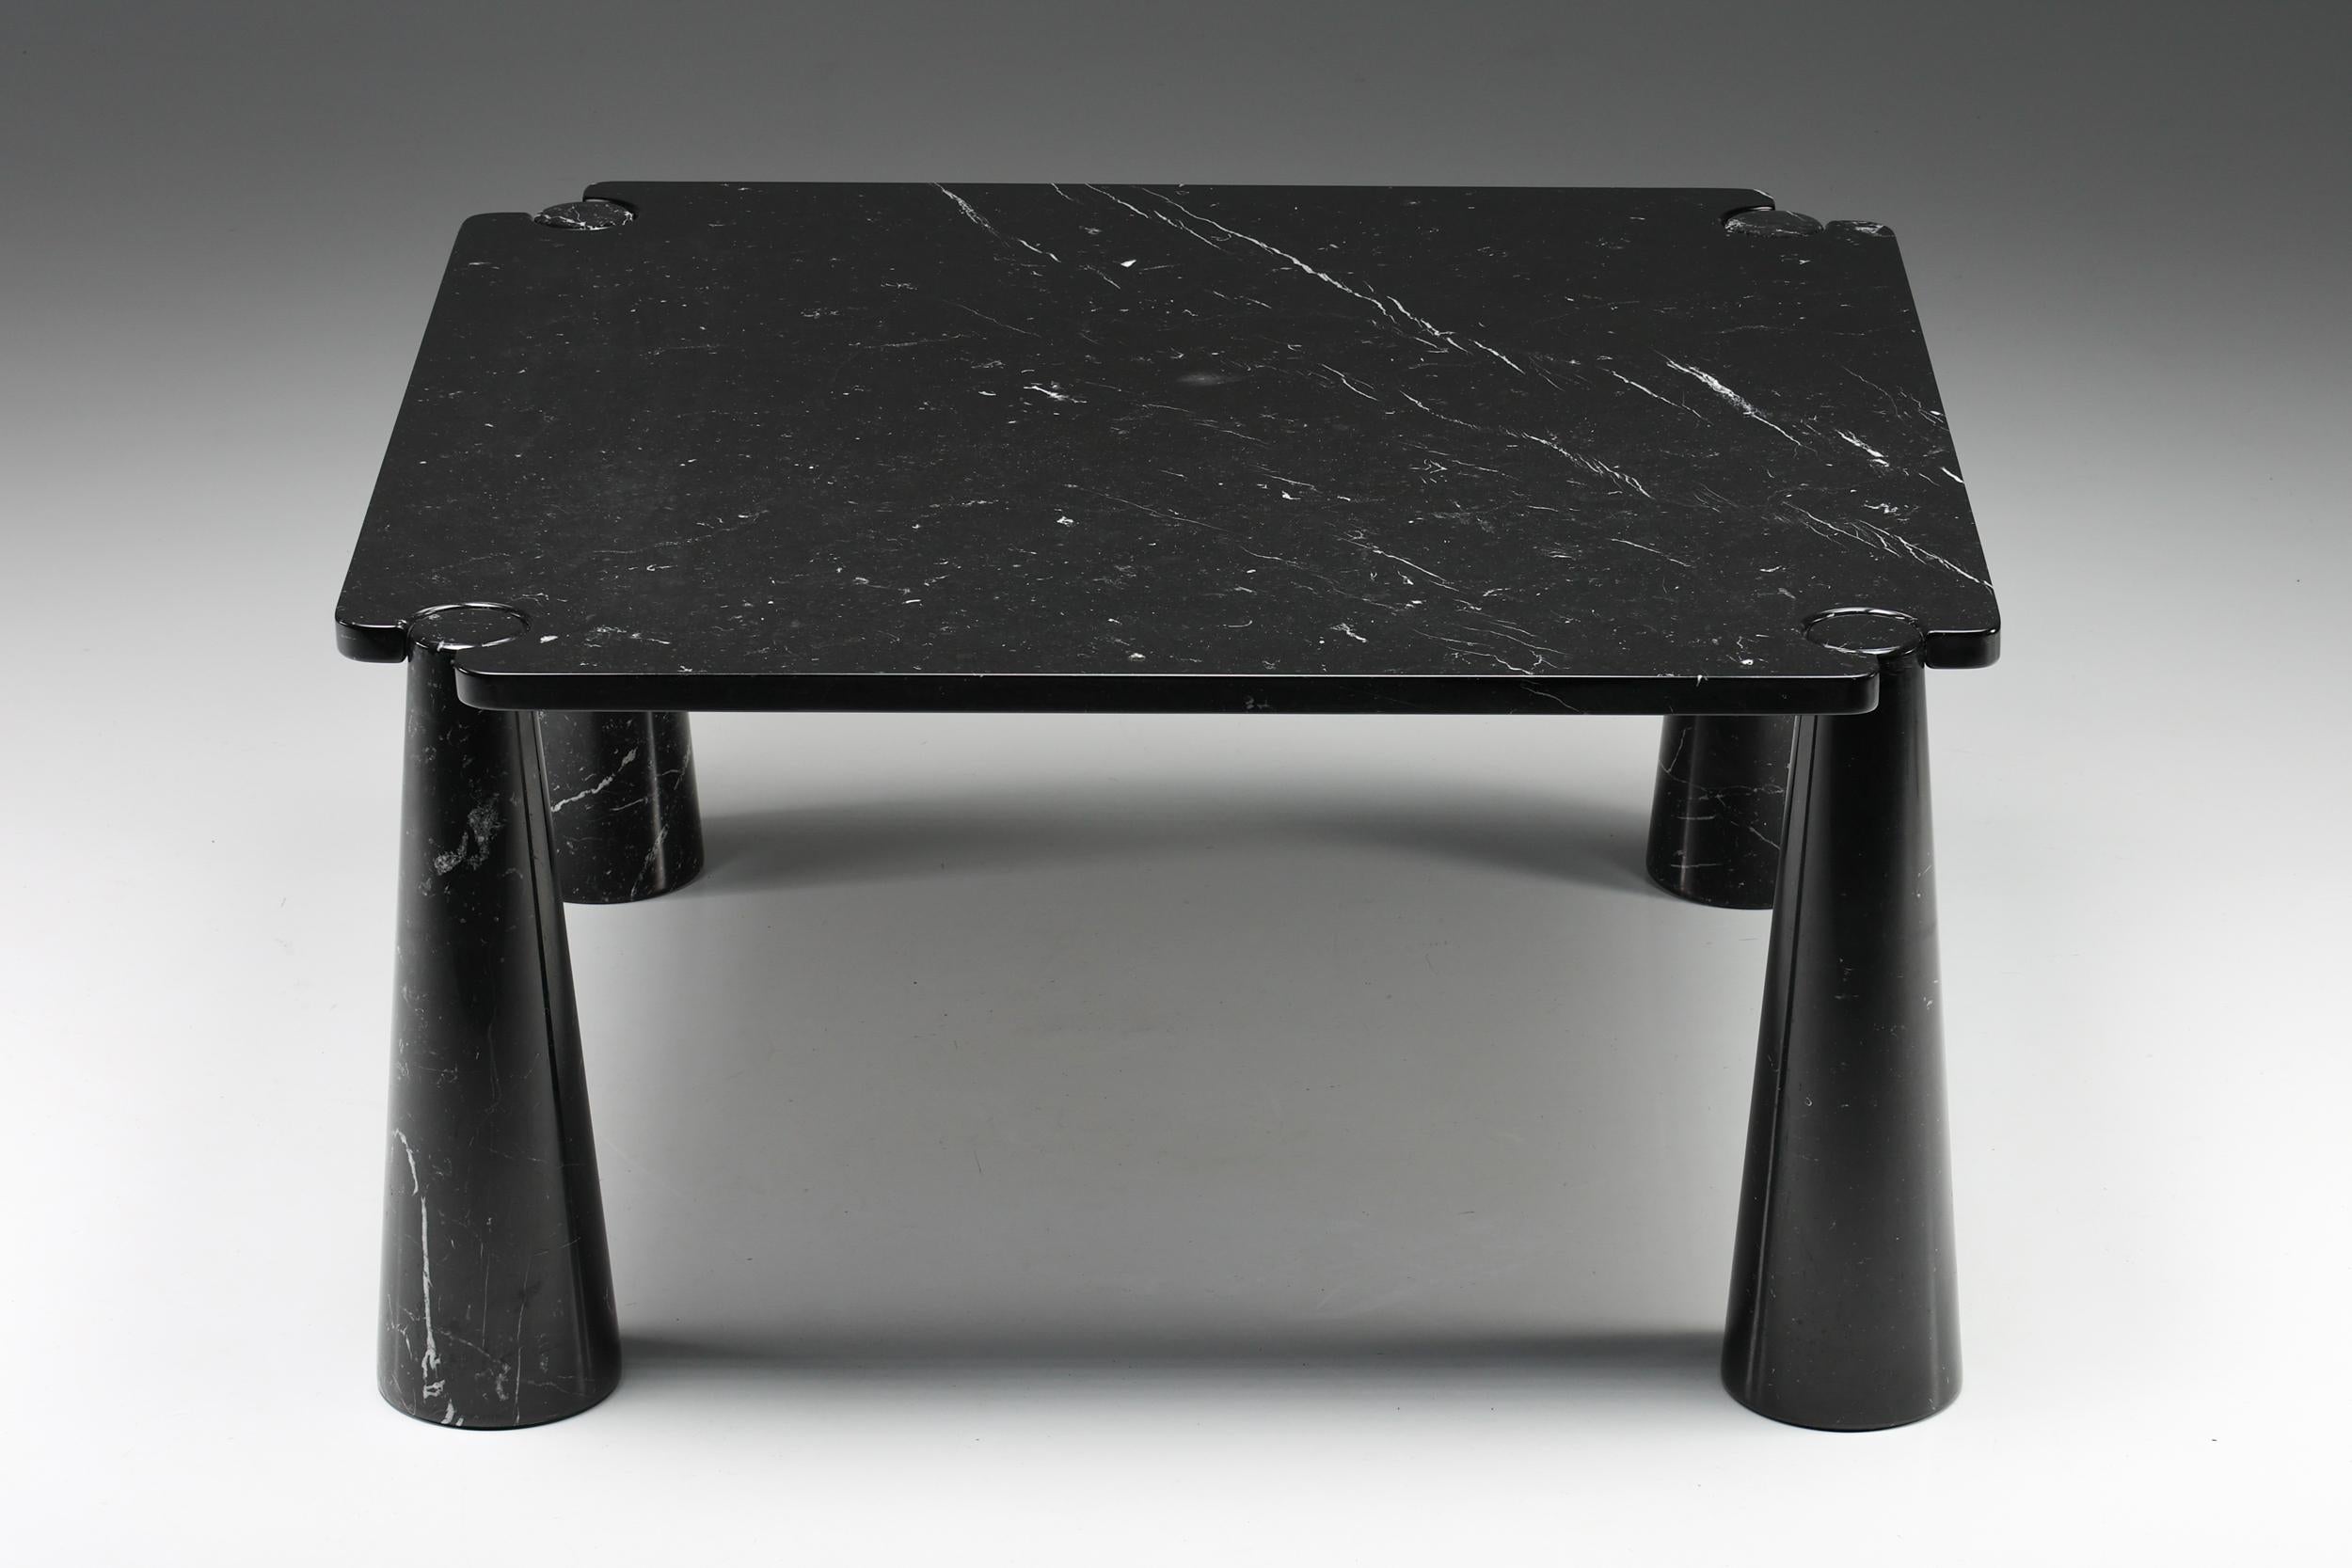 Mangiarotti 'Eros' Square Marble Dining Table, Italy, Post-Modern, 1970's For Sale 2